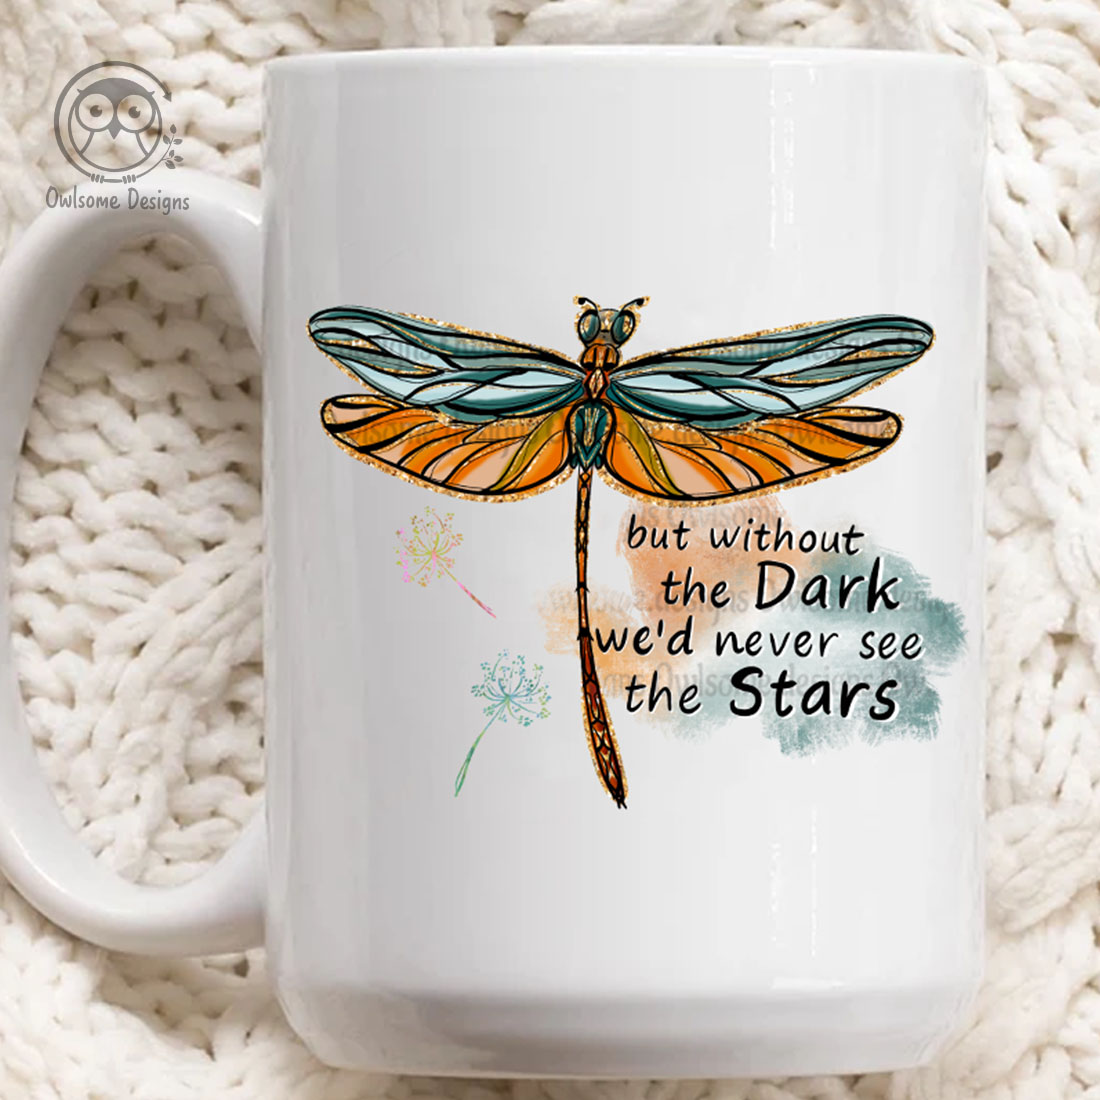 Image of cup with colorful dragonfly print and inscription.